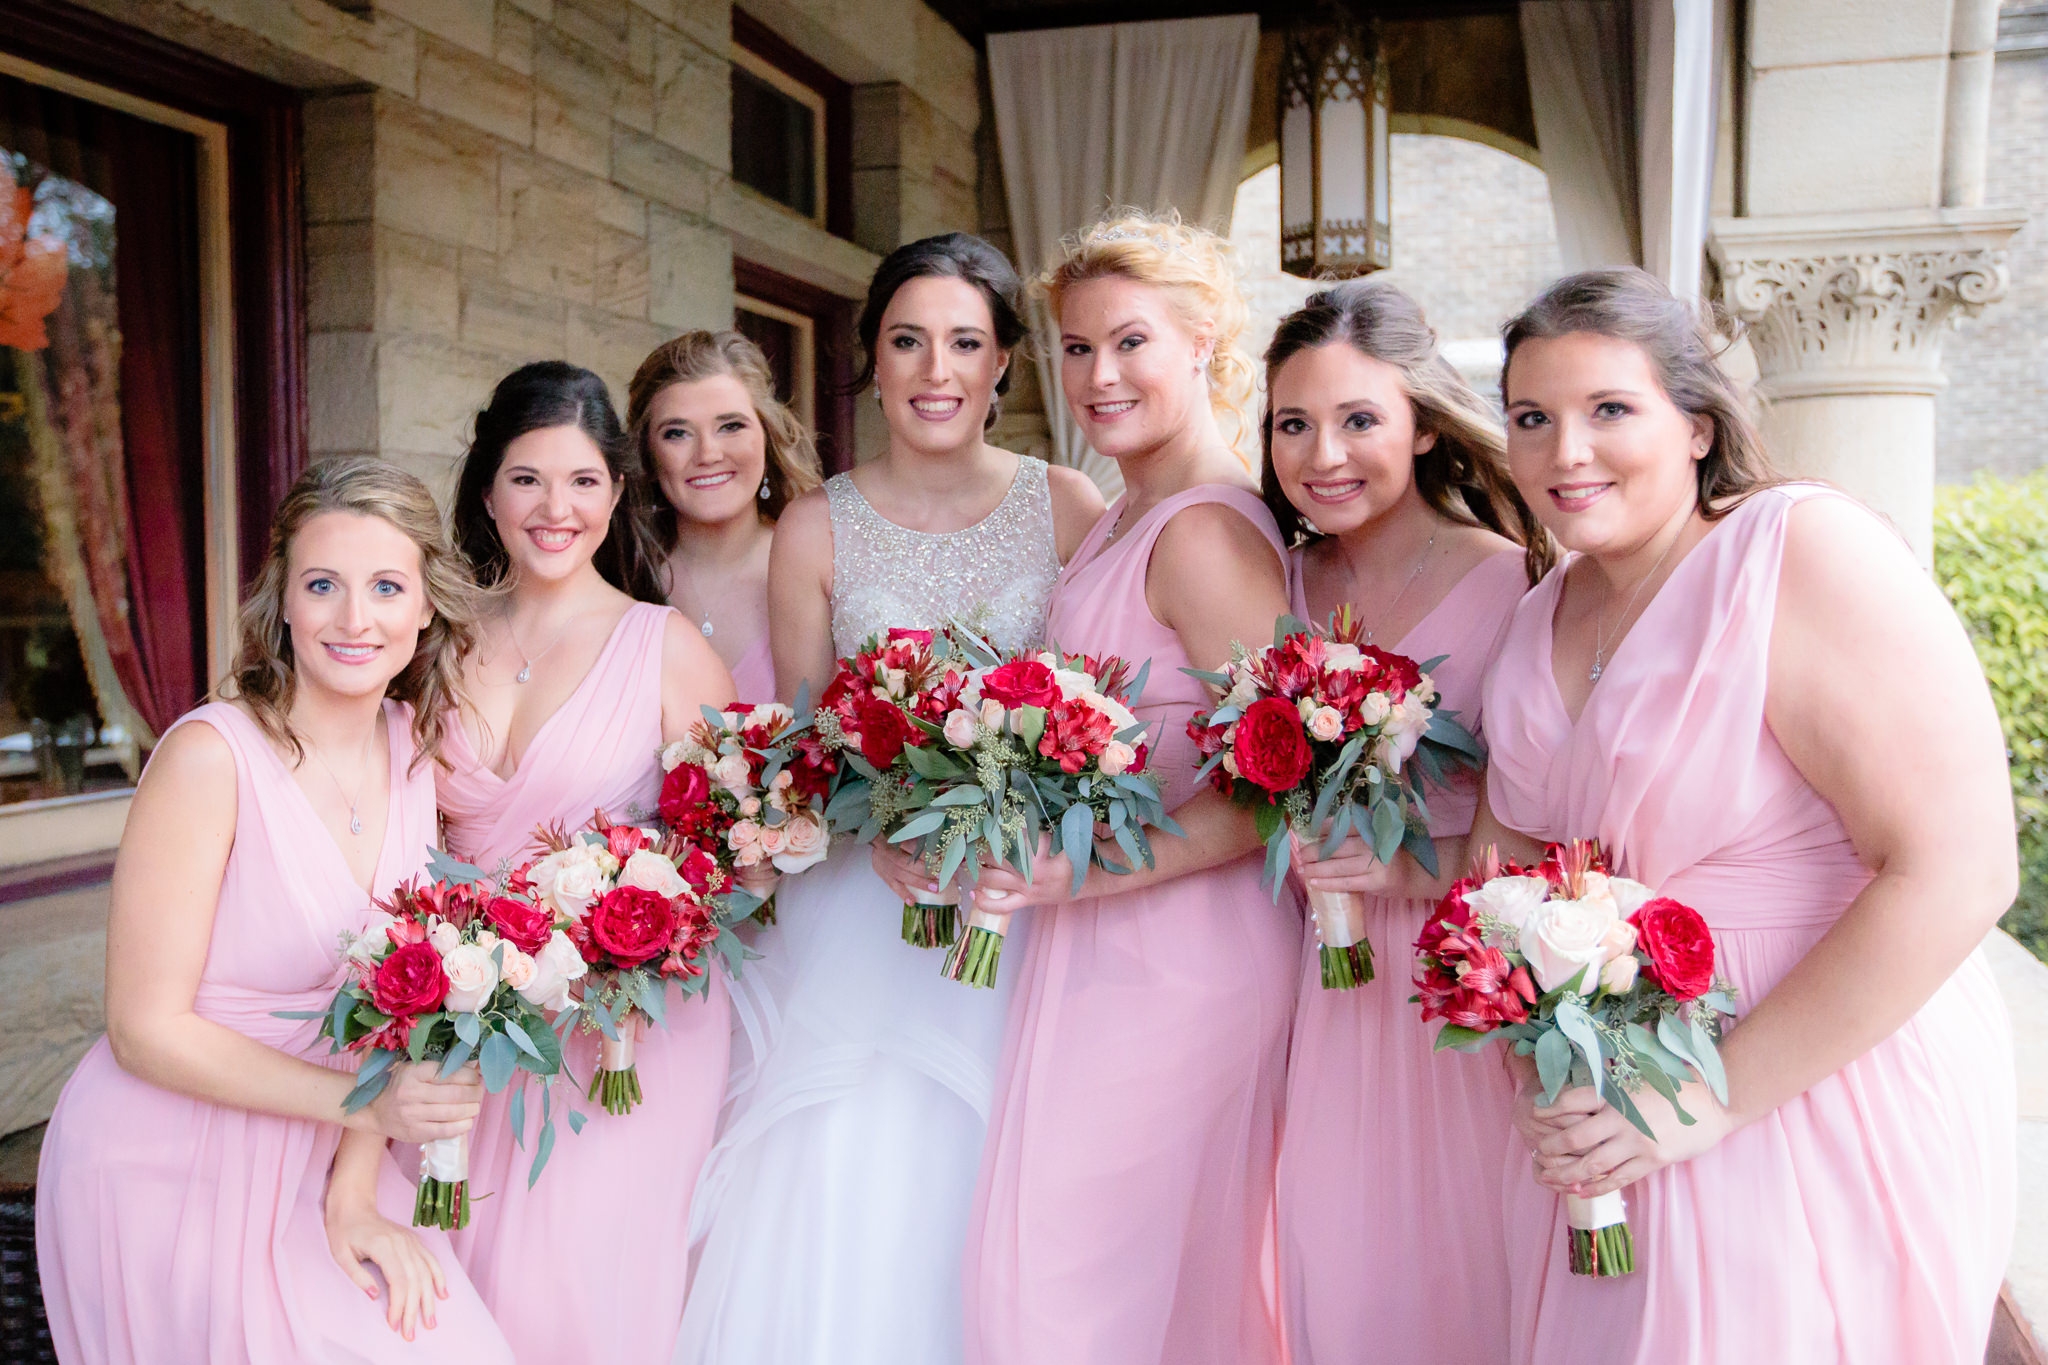 Bridesmaids in pink dresses from the Dessy Group before a LeMont wedding